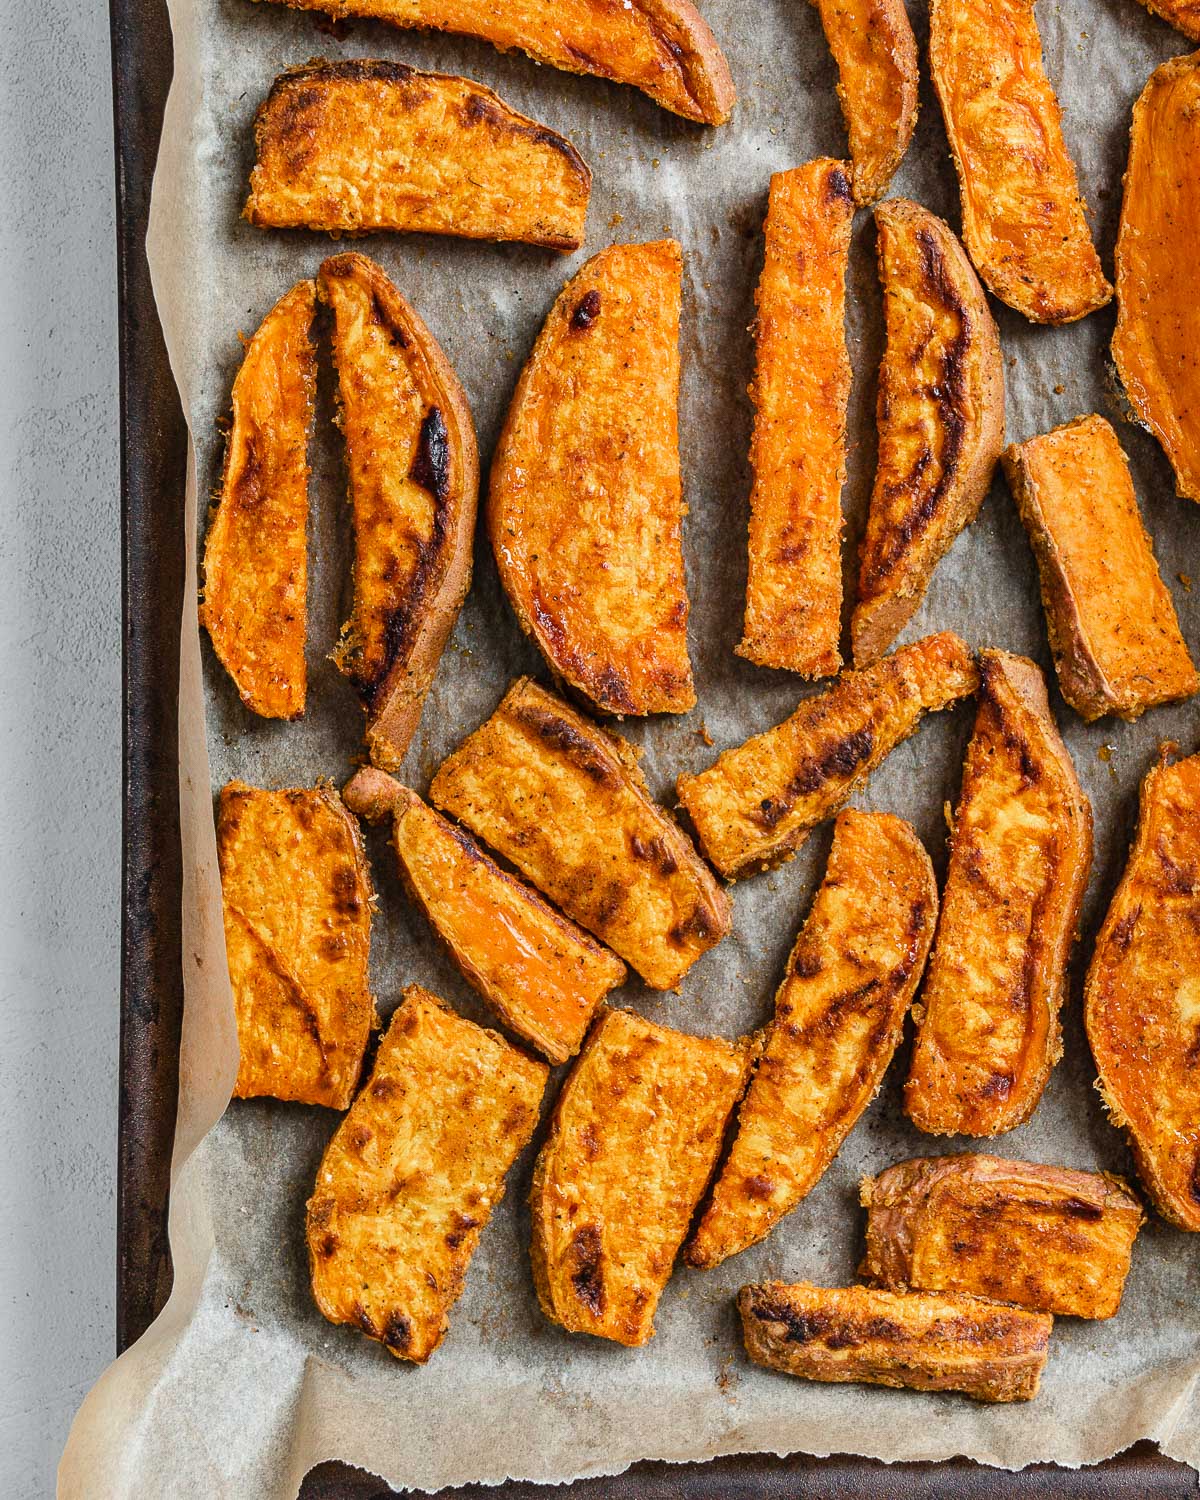 completed sweet potato wedges on a baking tray against a white background